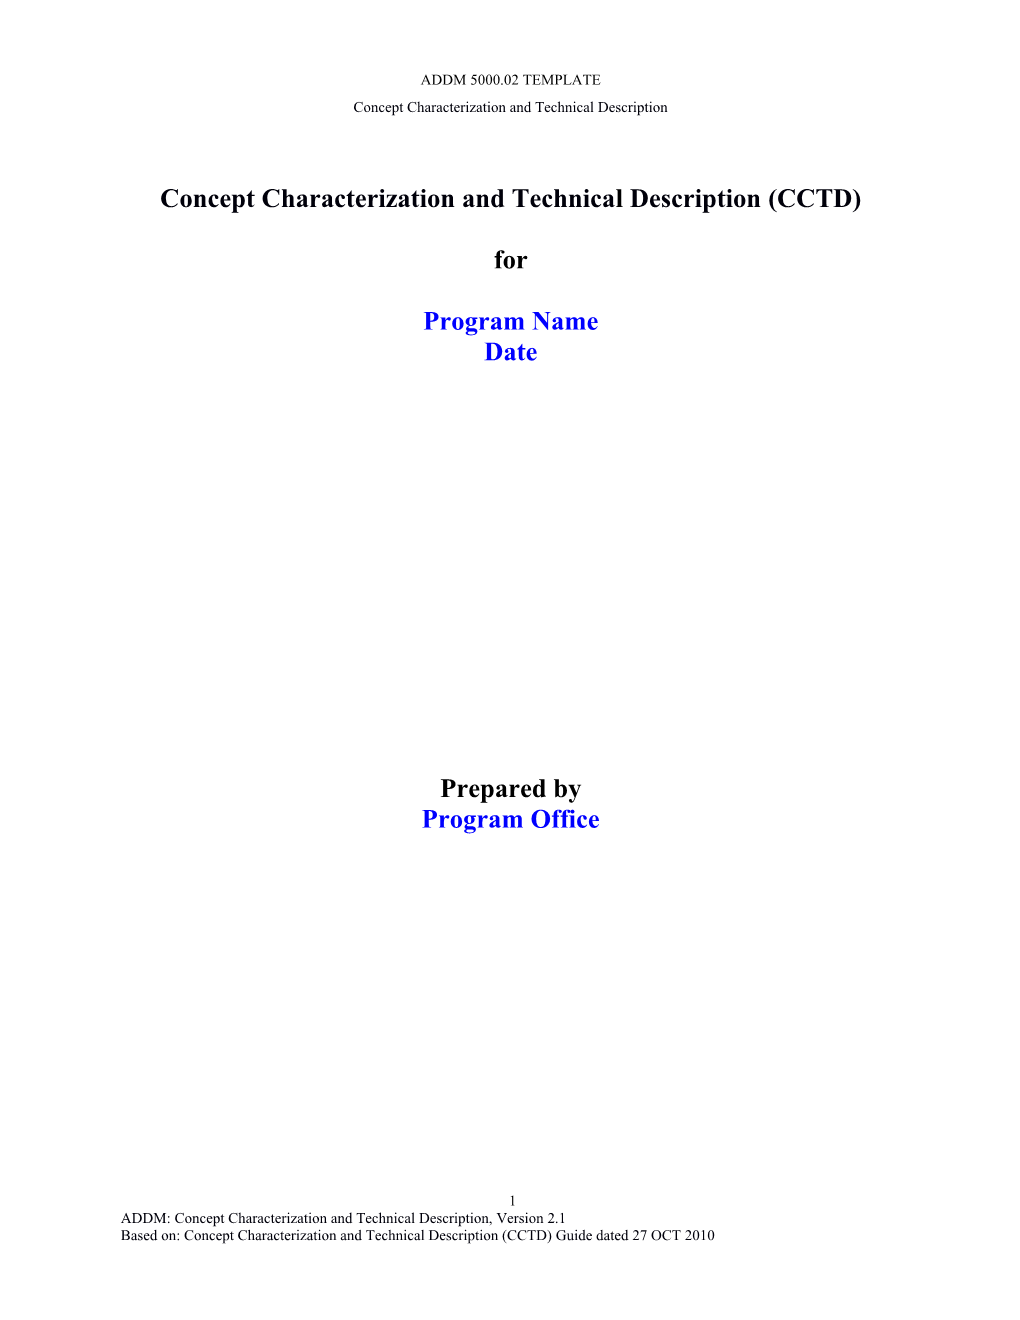 Concept Characterization and Technical Description CCTD ADDM Template V 2.1